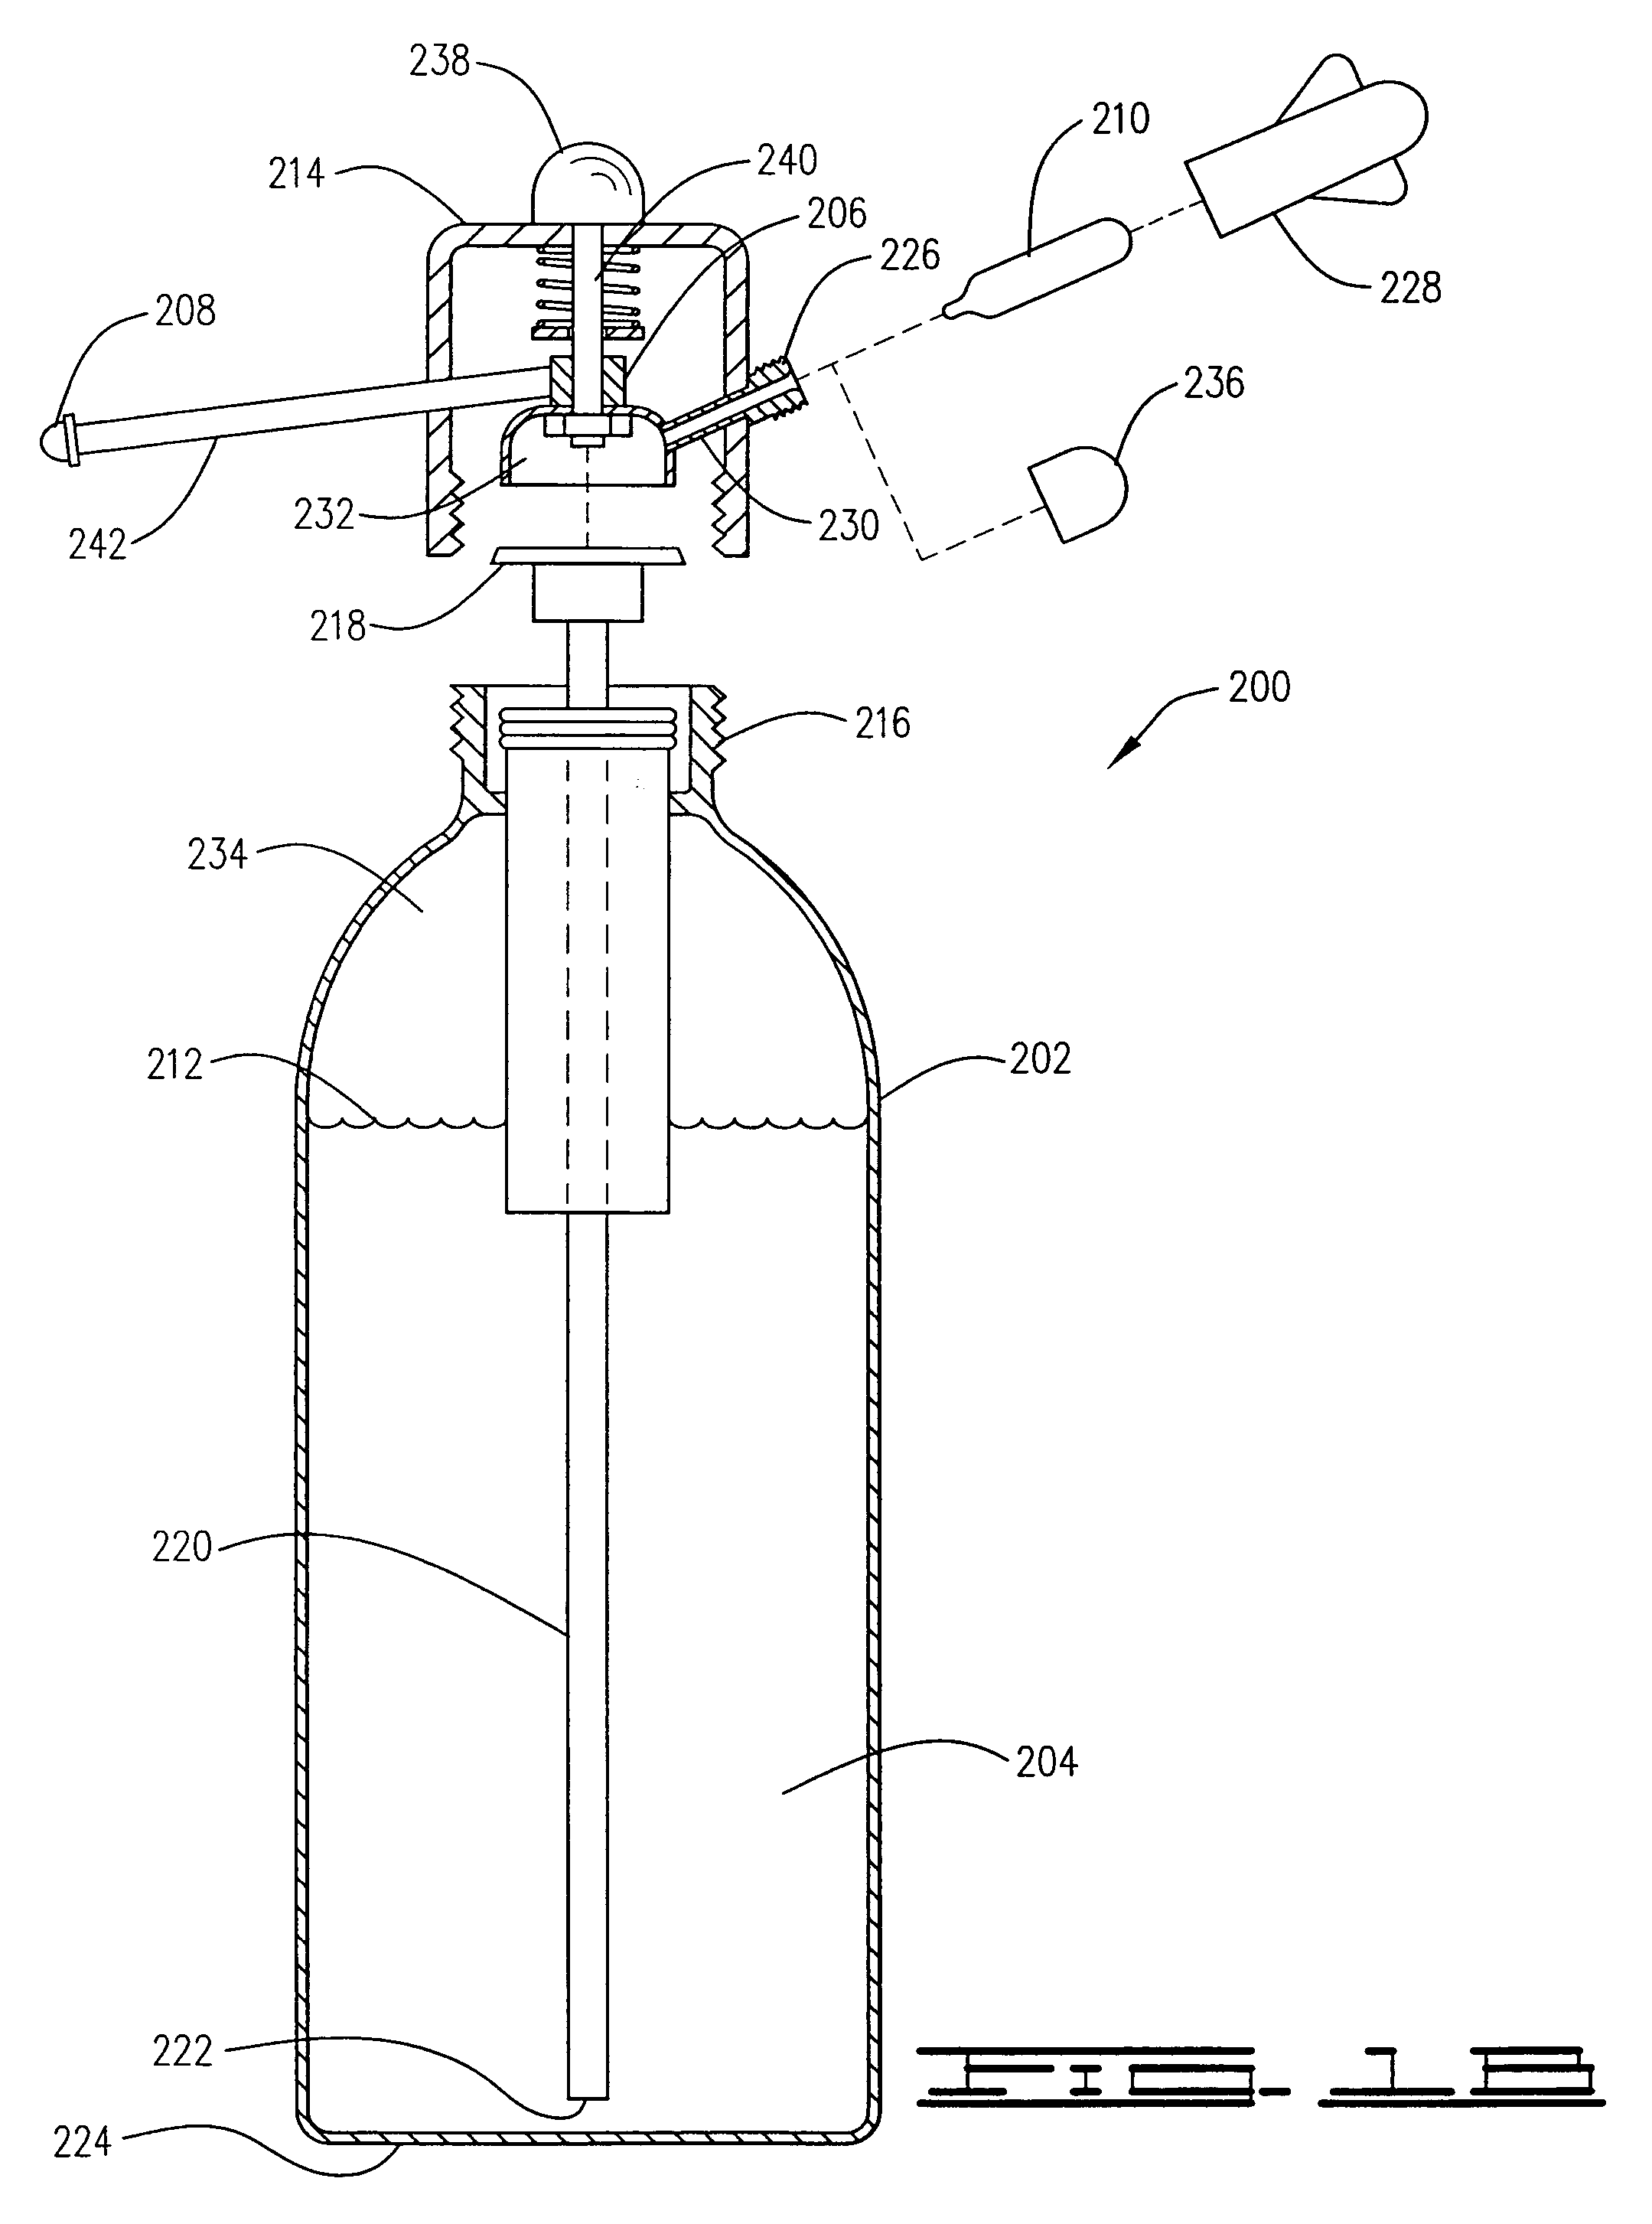 Alert system with enhanced waking capabilities